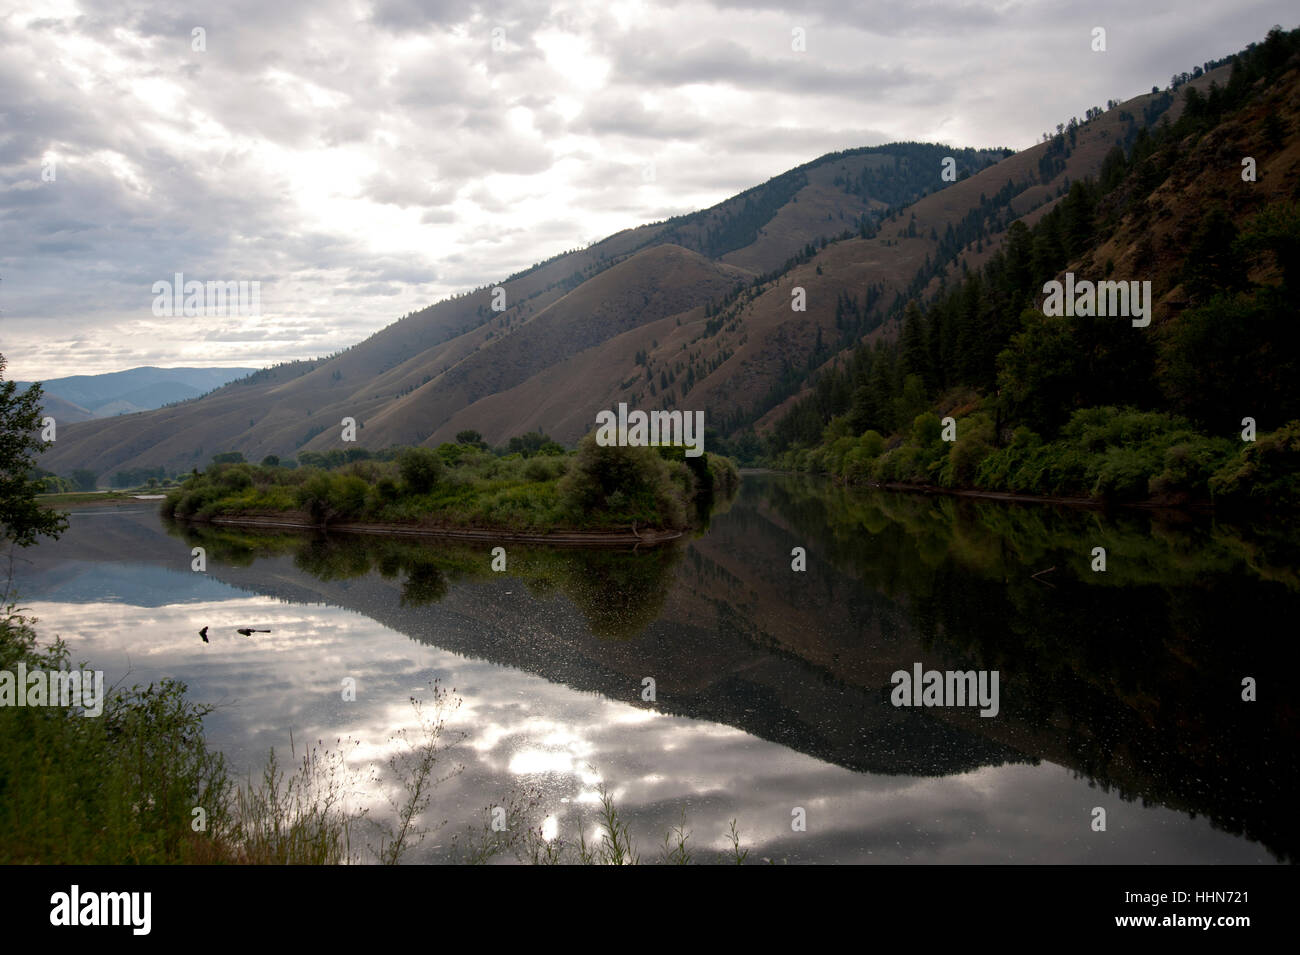 Calm portion of the Salmon River showing the reflection of the Sawtooth Mountains and cloudy sky in a valley leading to Shoup Stock Photo